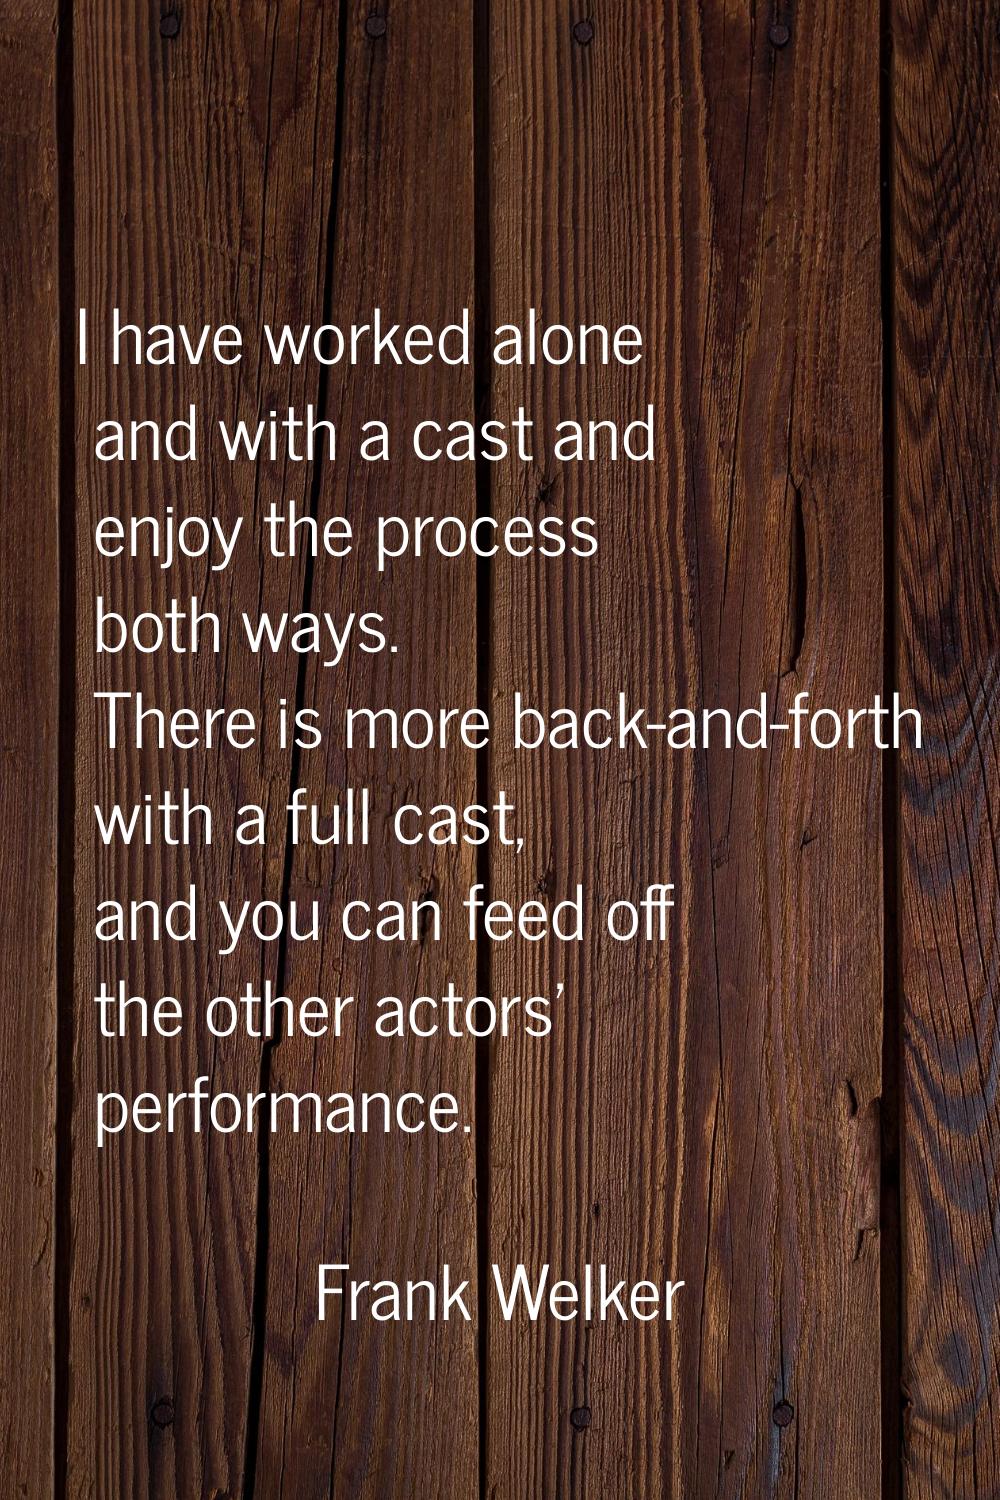 I have worked alone and with a cast and enjoy the process both ways. There is more back-and-forth w